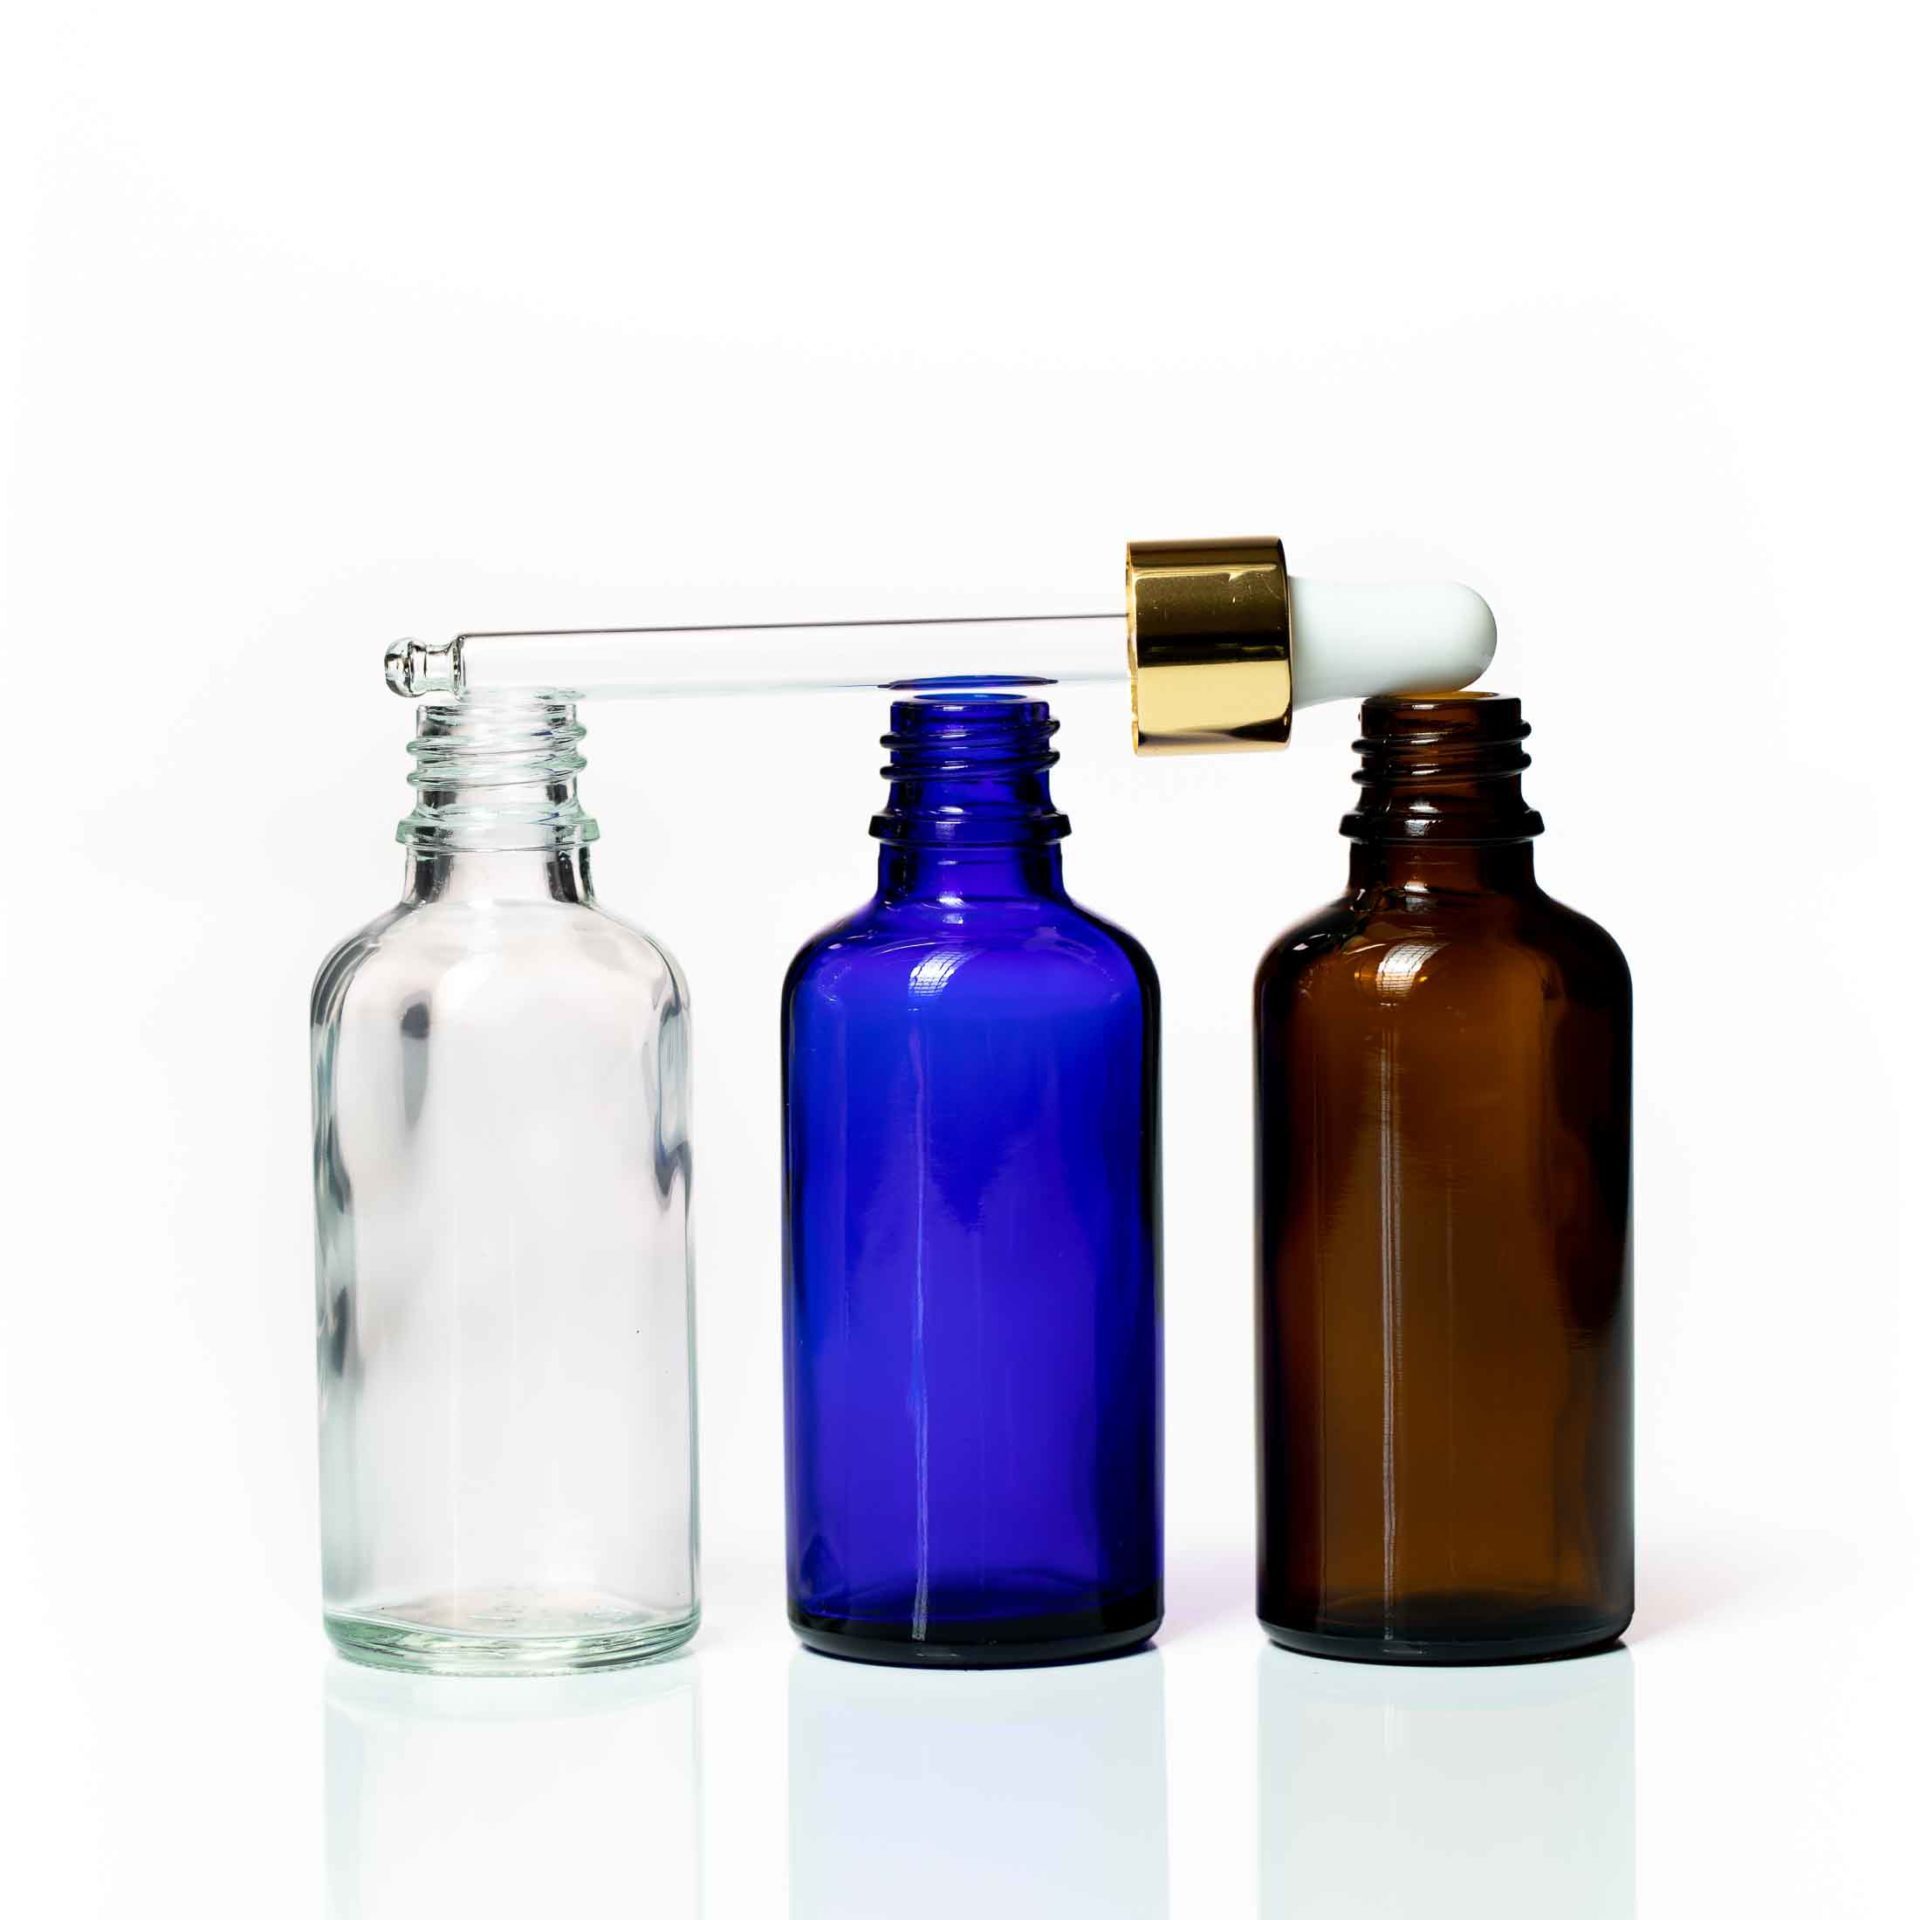 See us for all of your aromatherapy, homeopathy and naturapathy supplies.  www.WholesaleAromaSupplies.co.nz